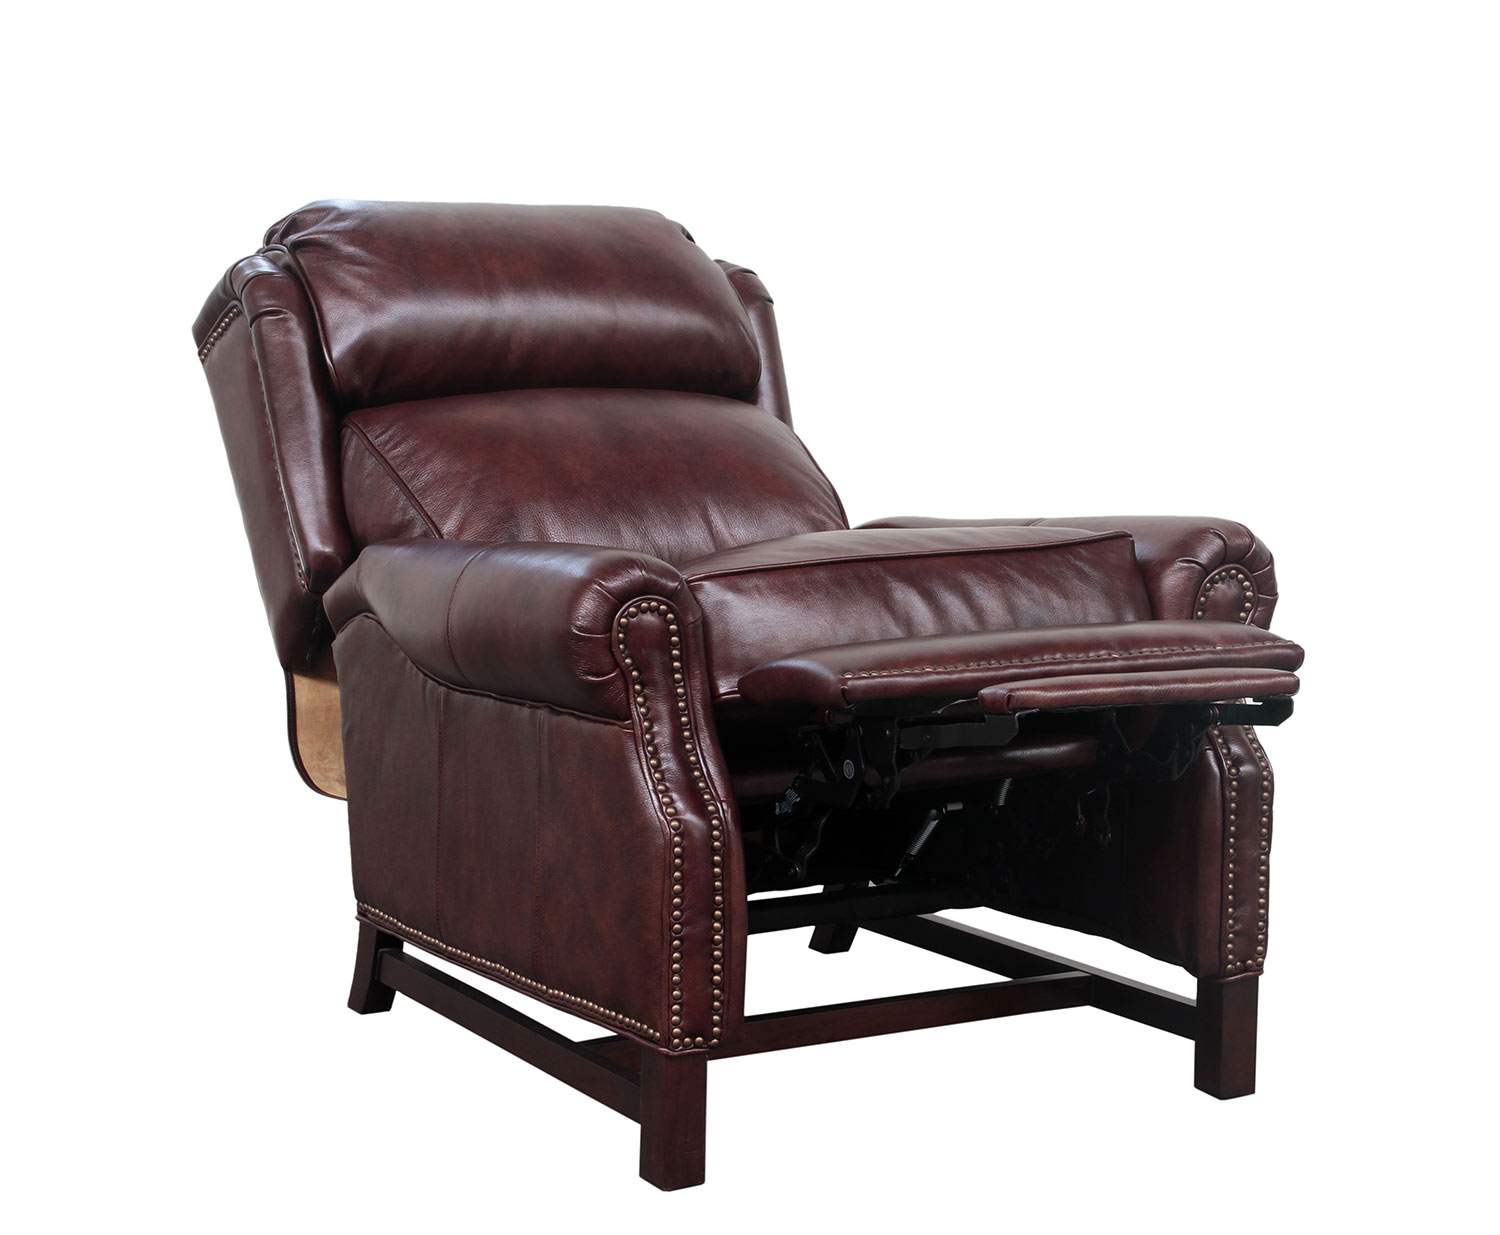 Barcalounger Thornfield Recliner Chair - Wenlock Fudge/All Leather